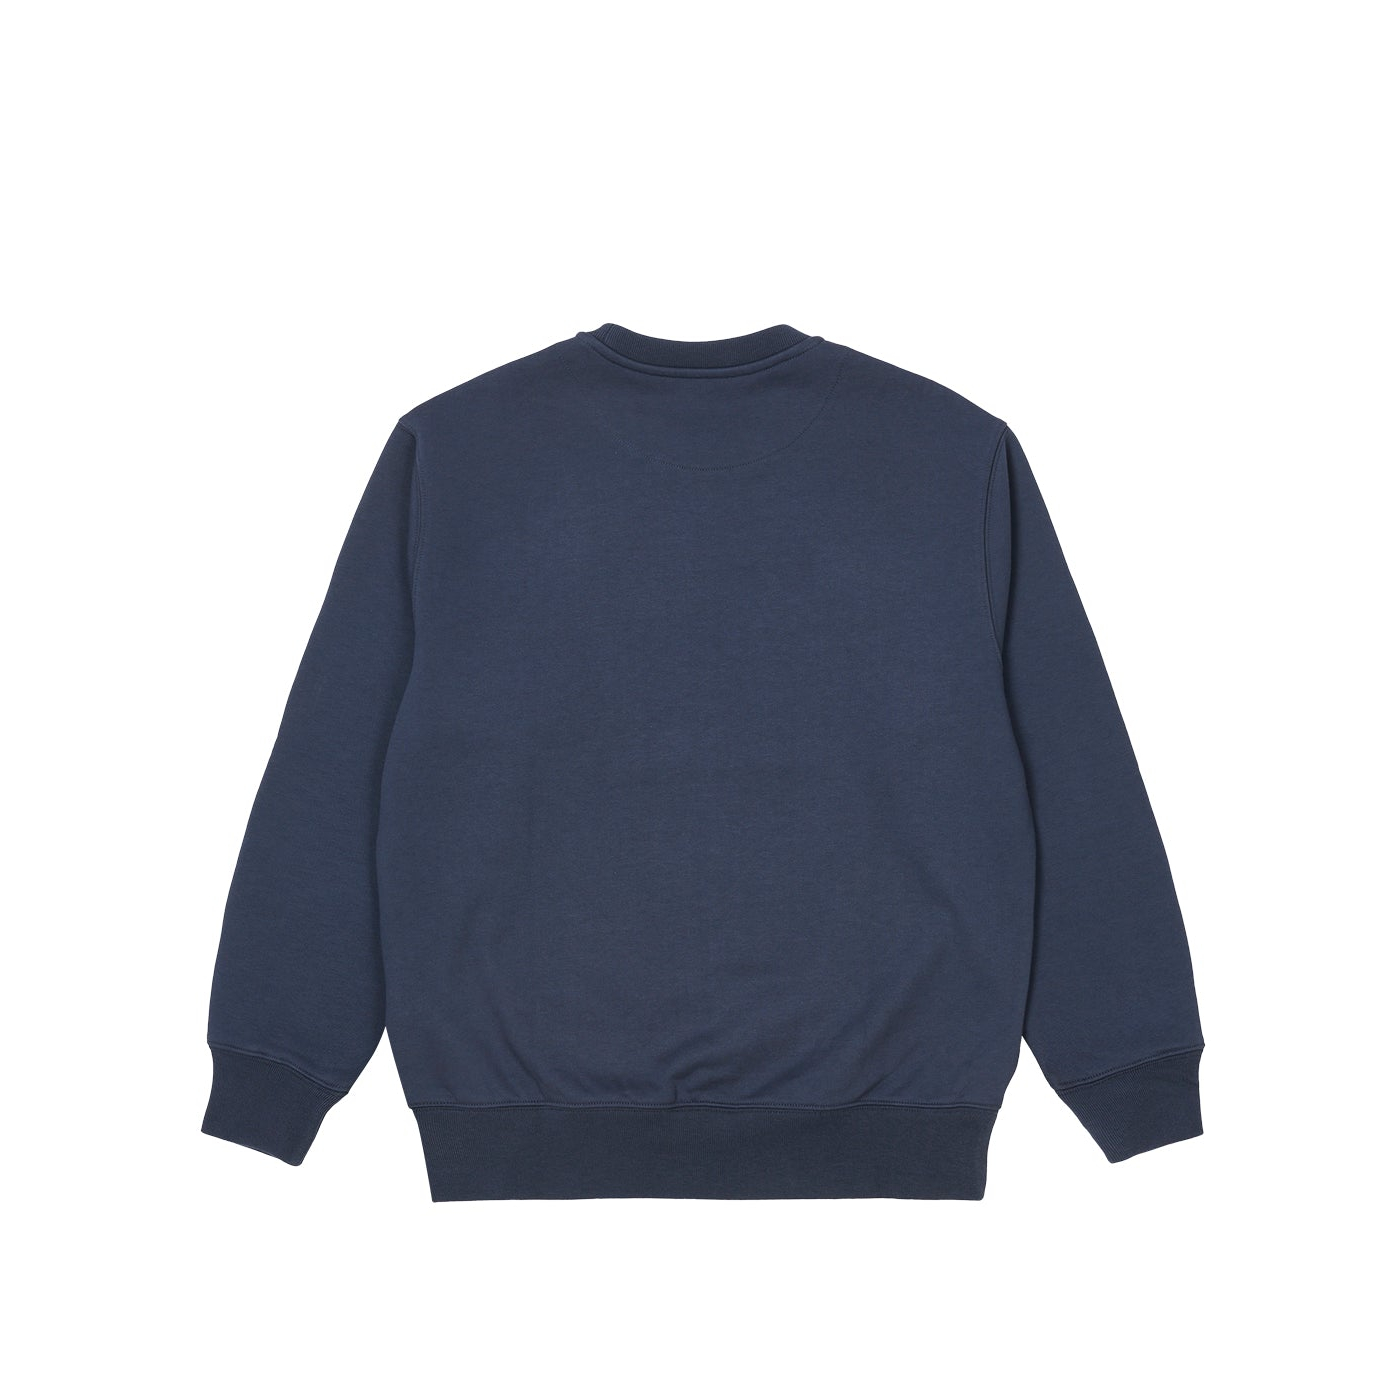 Thumbnail GIGANTIC CREW NAVY one color